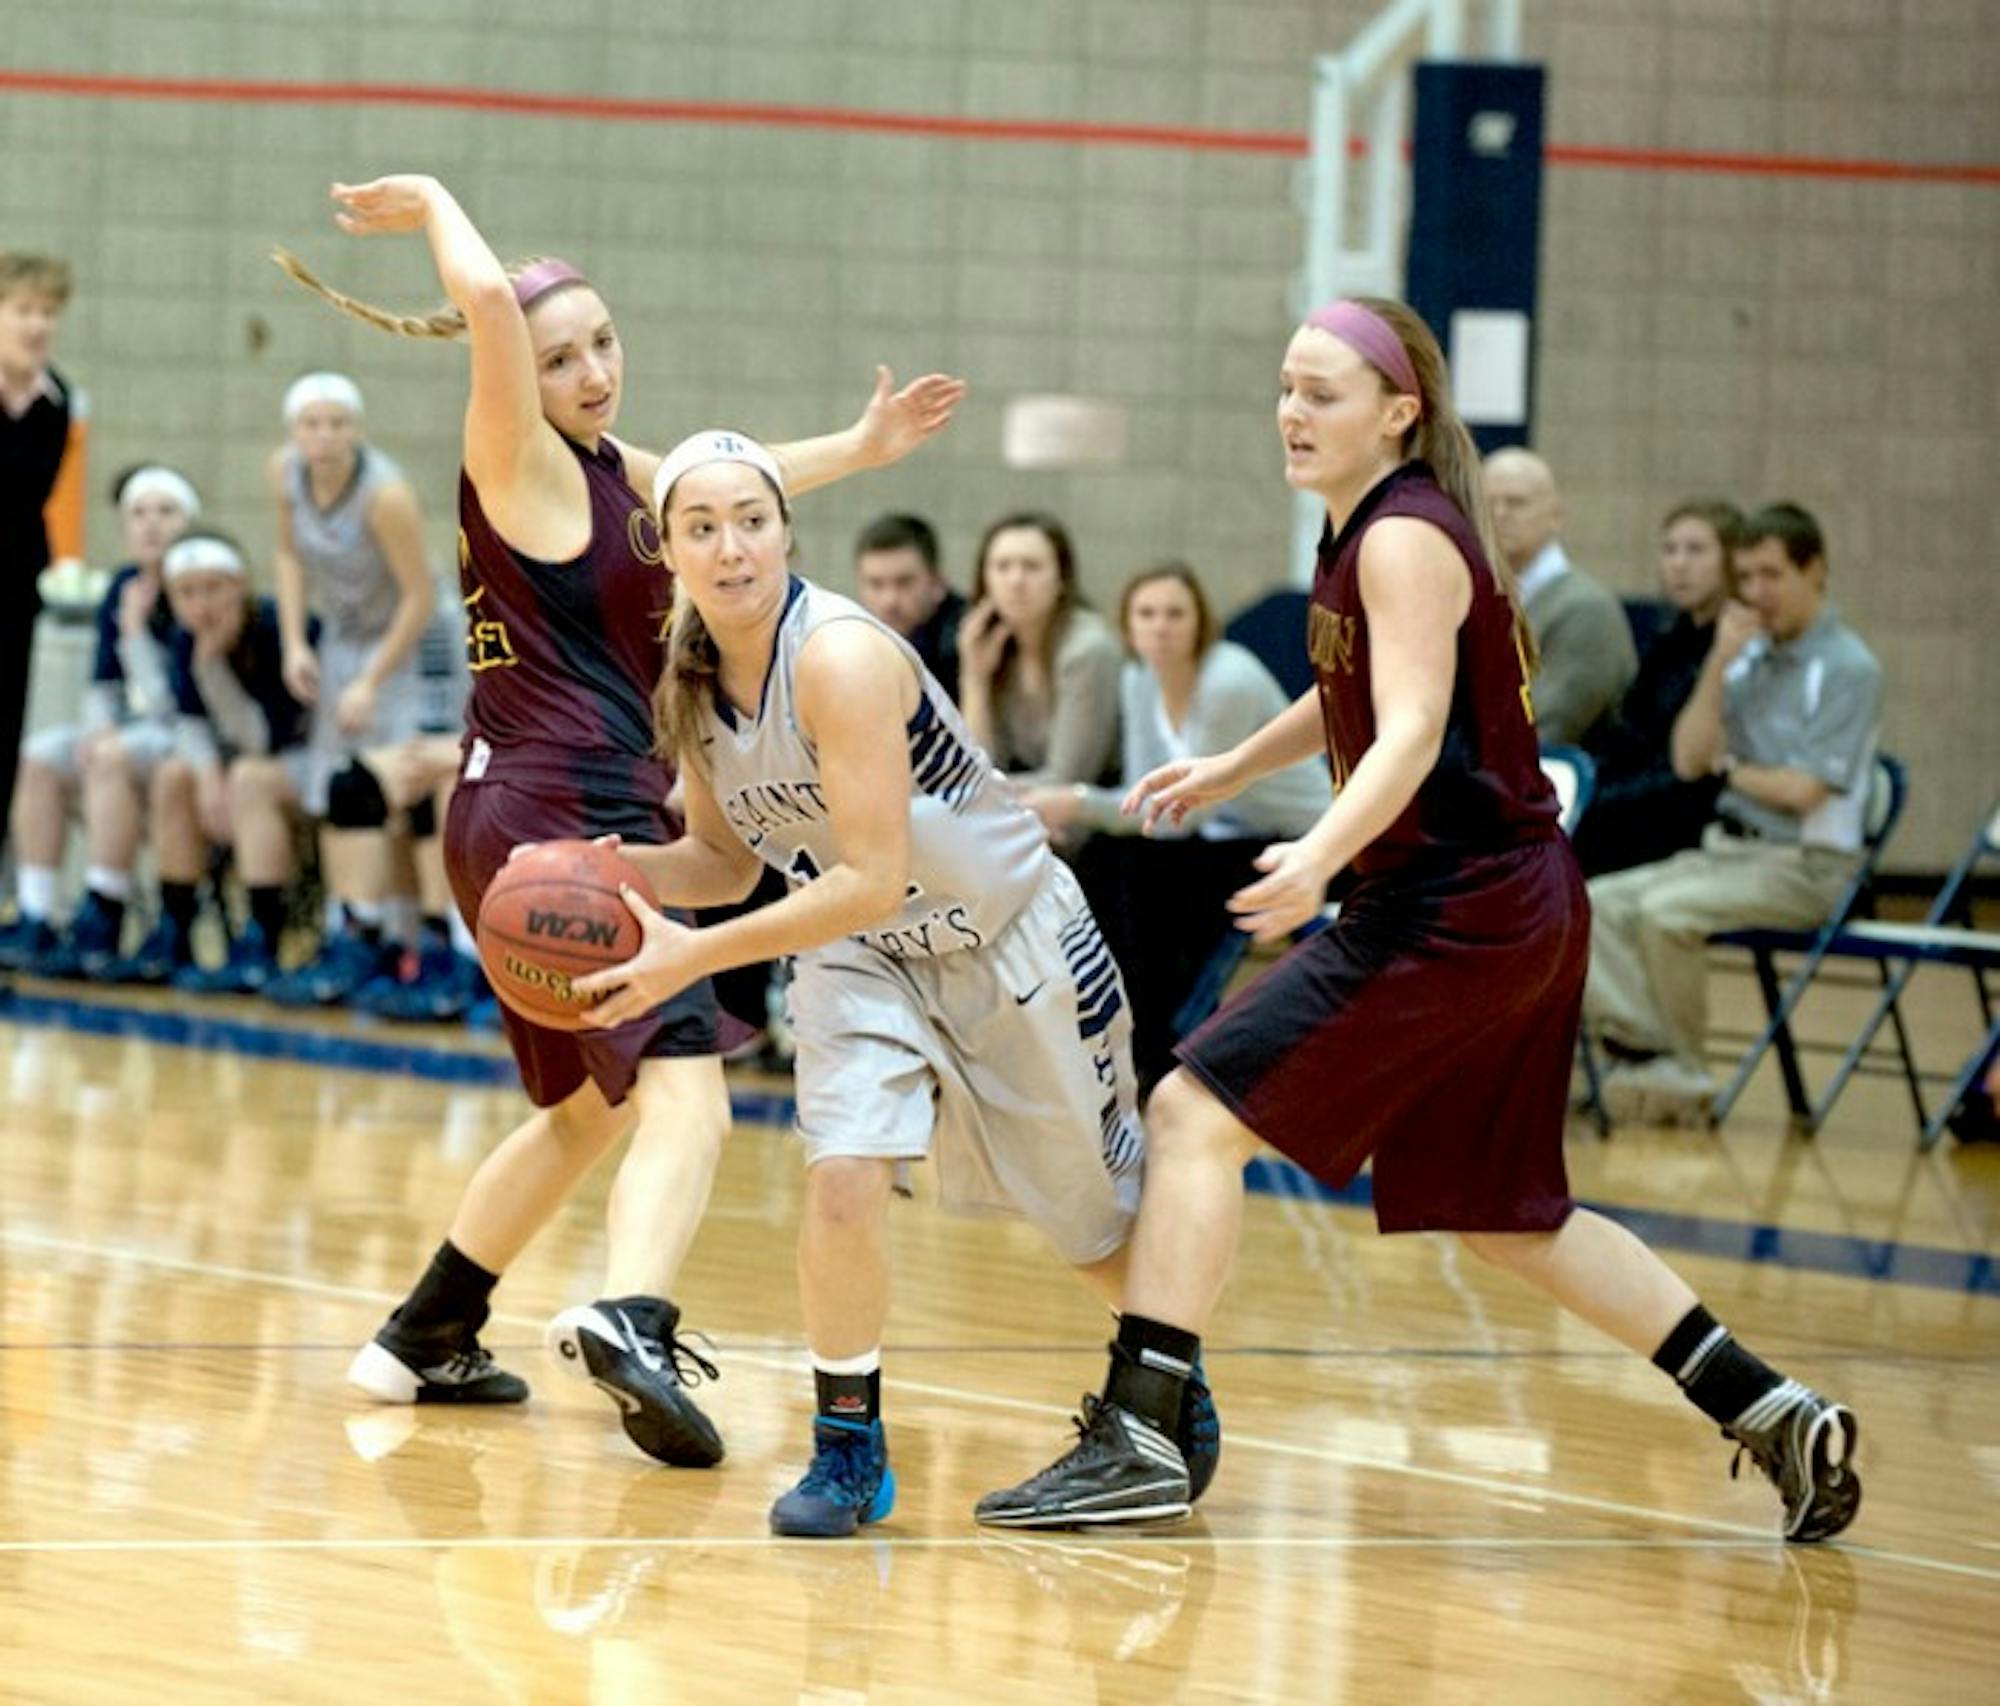 Saint Mary's freshman point guard Kristen Kleist looks to pass while avoiding two defenders during 95-68 loss to Calvin on Jan. 15.